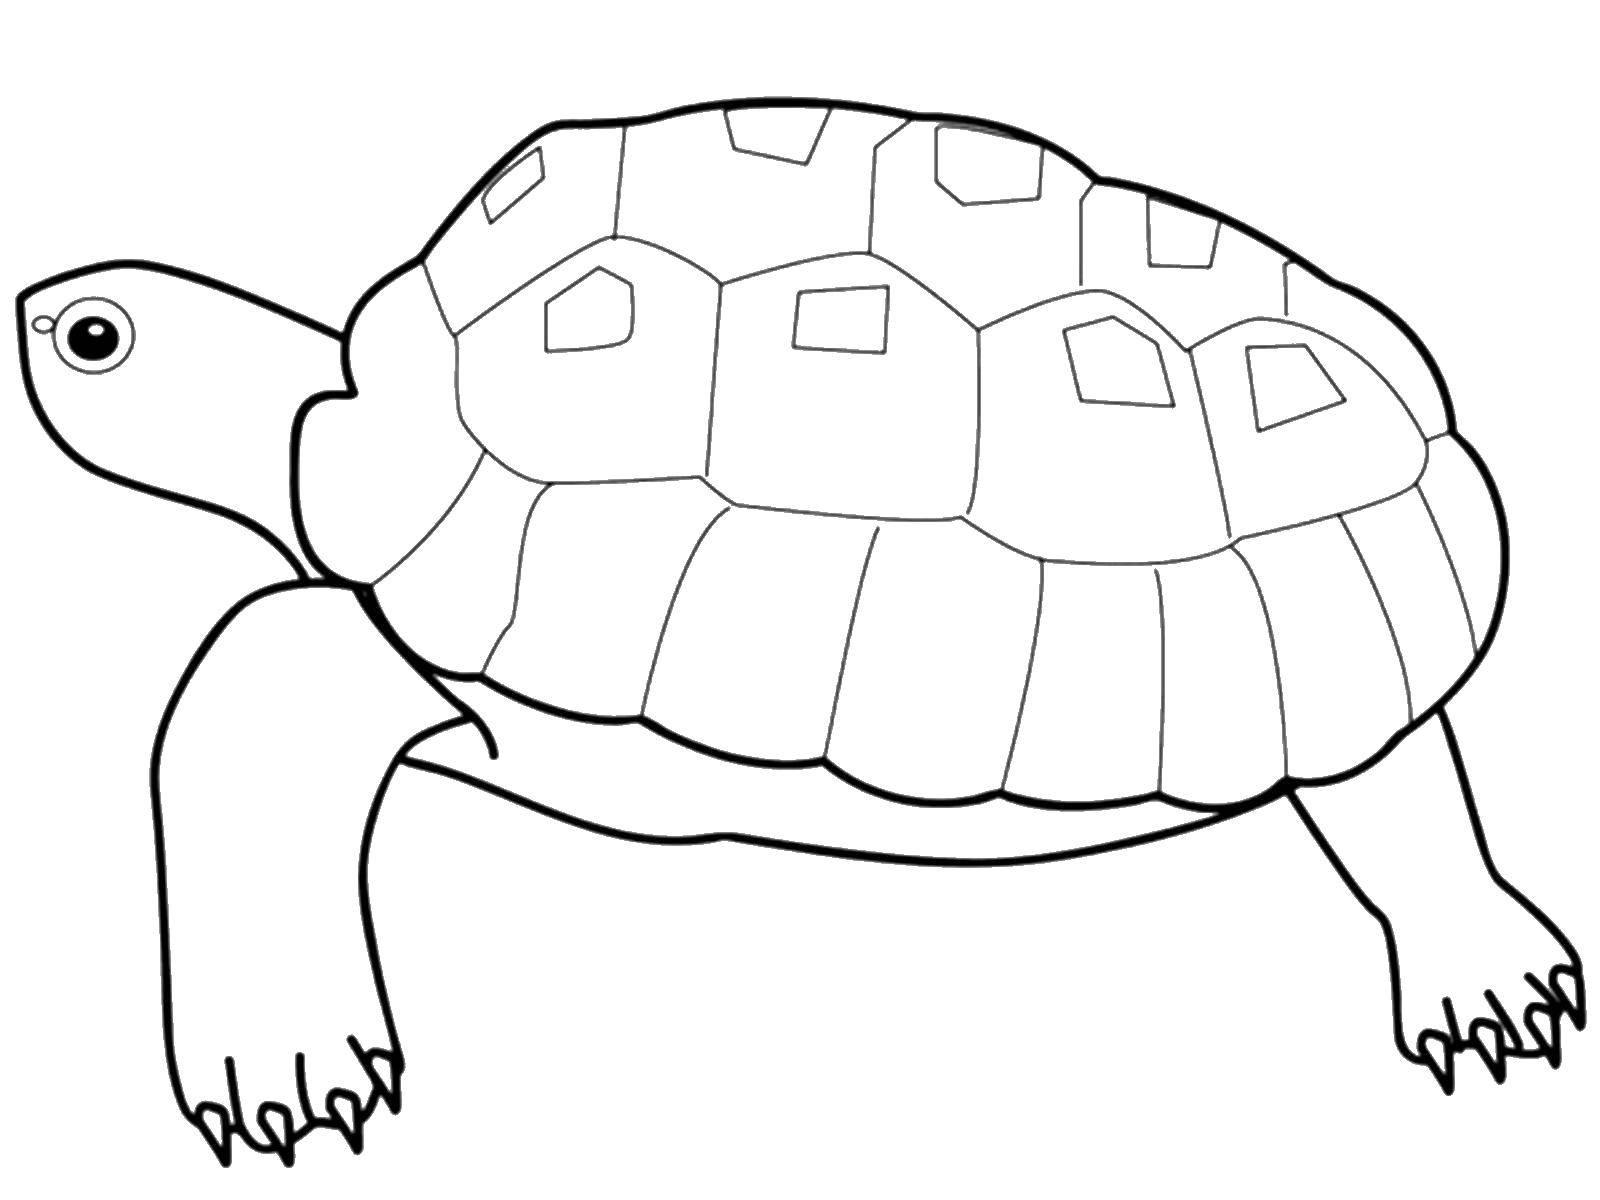 Coloring Big turtle. Category wild animals. Tags:  Turtle.